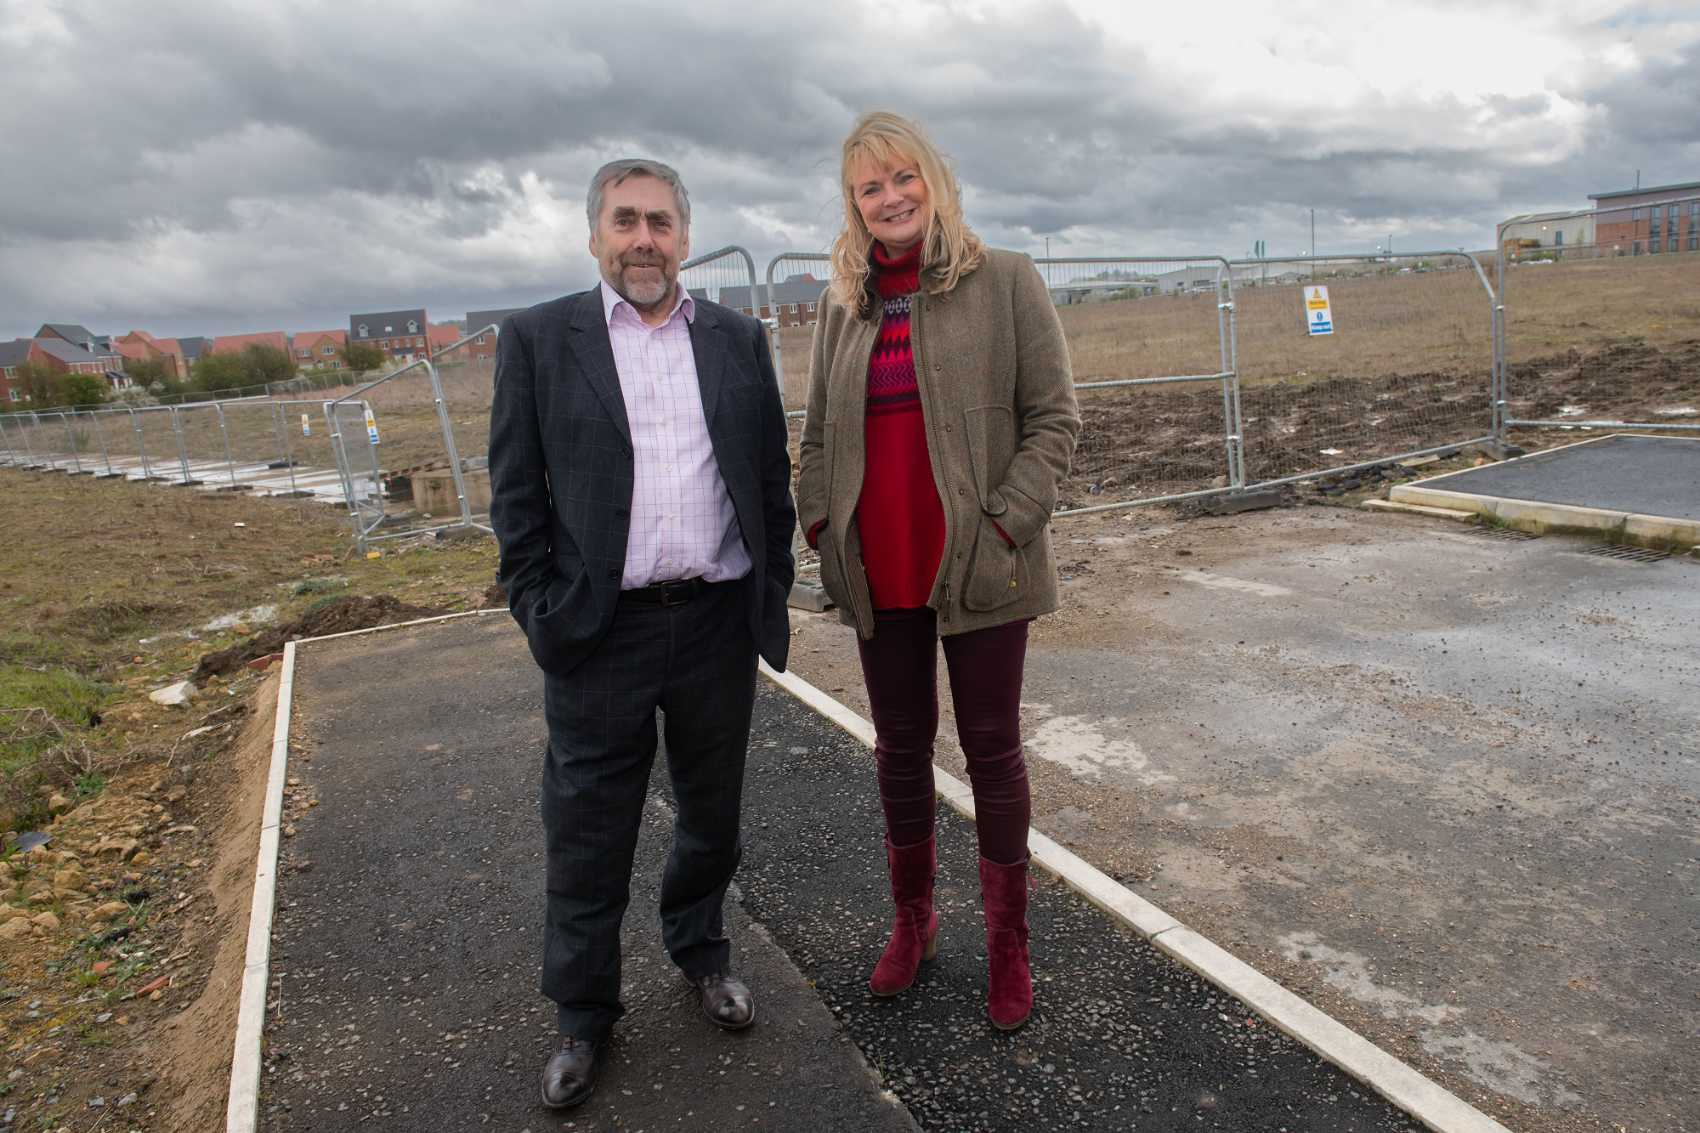 Cllr Annabel Wilkinson with colleague Cllr Steve Watson, who represents the Northallerton North and Brompton division, where the school will be based, at the Alvertune Road site.